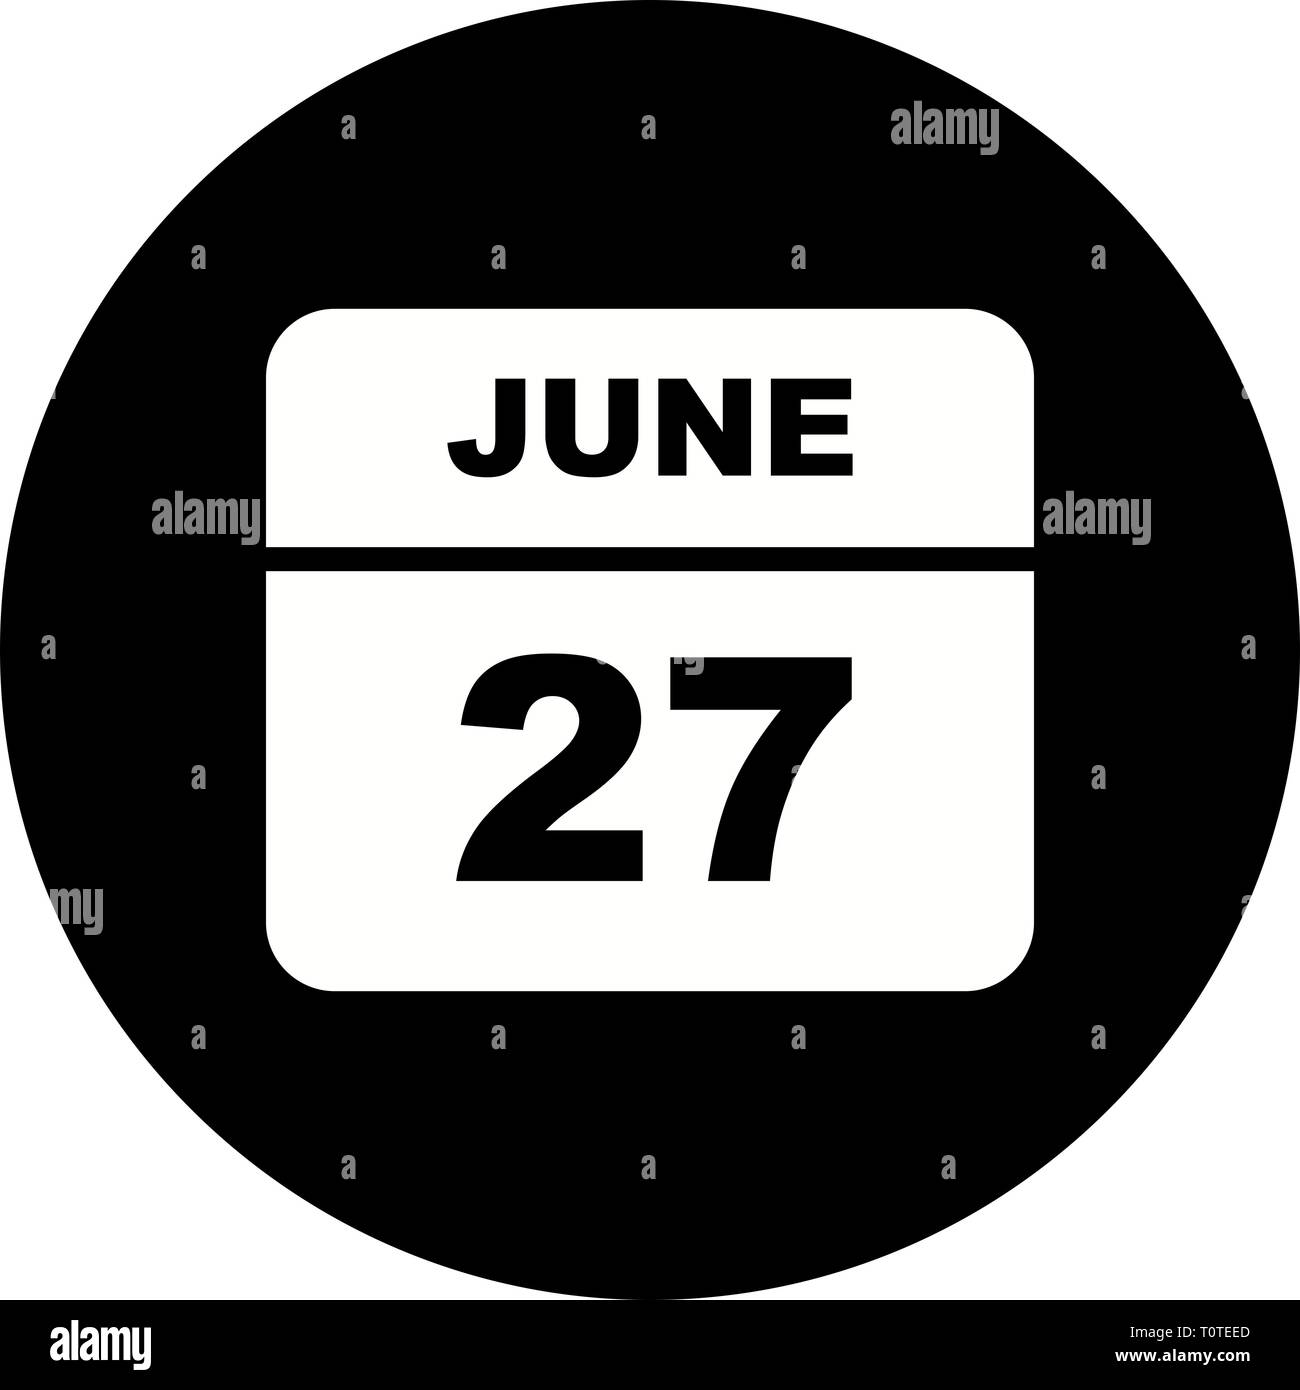 June 27th Date on a Single Day Calendar Stock Photo Alamy